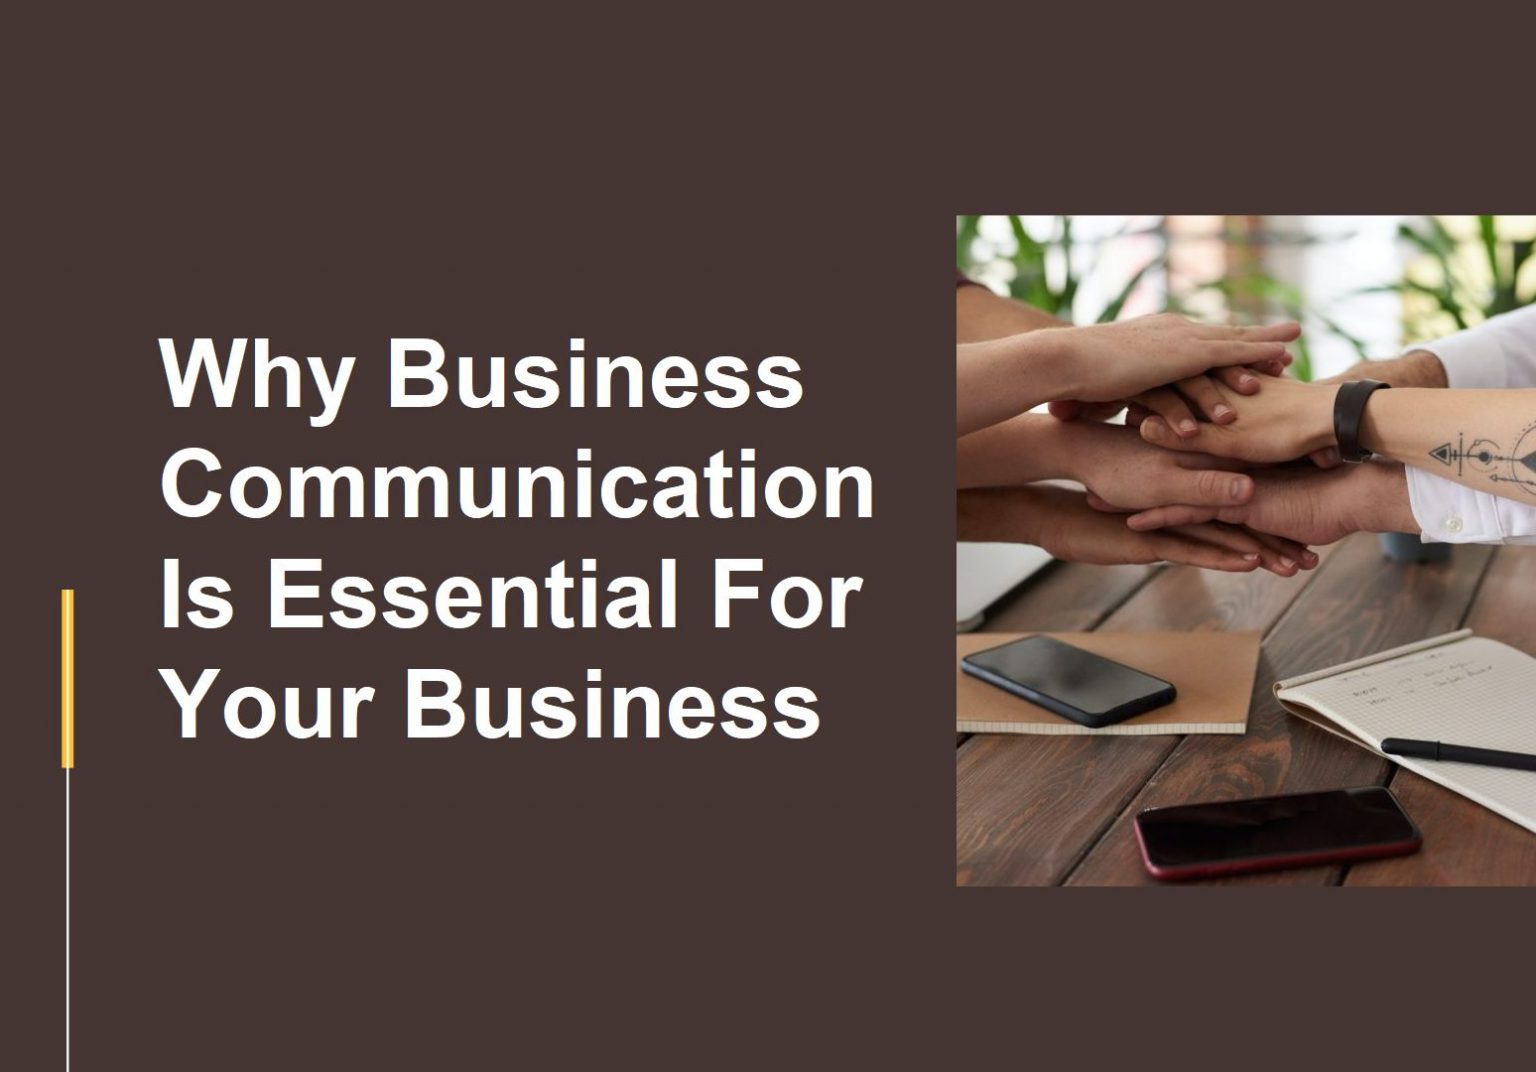 Why business communication is essential for your business